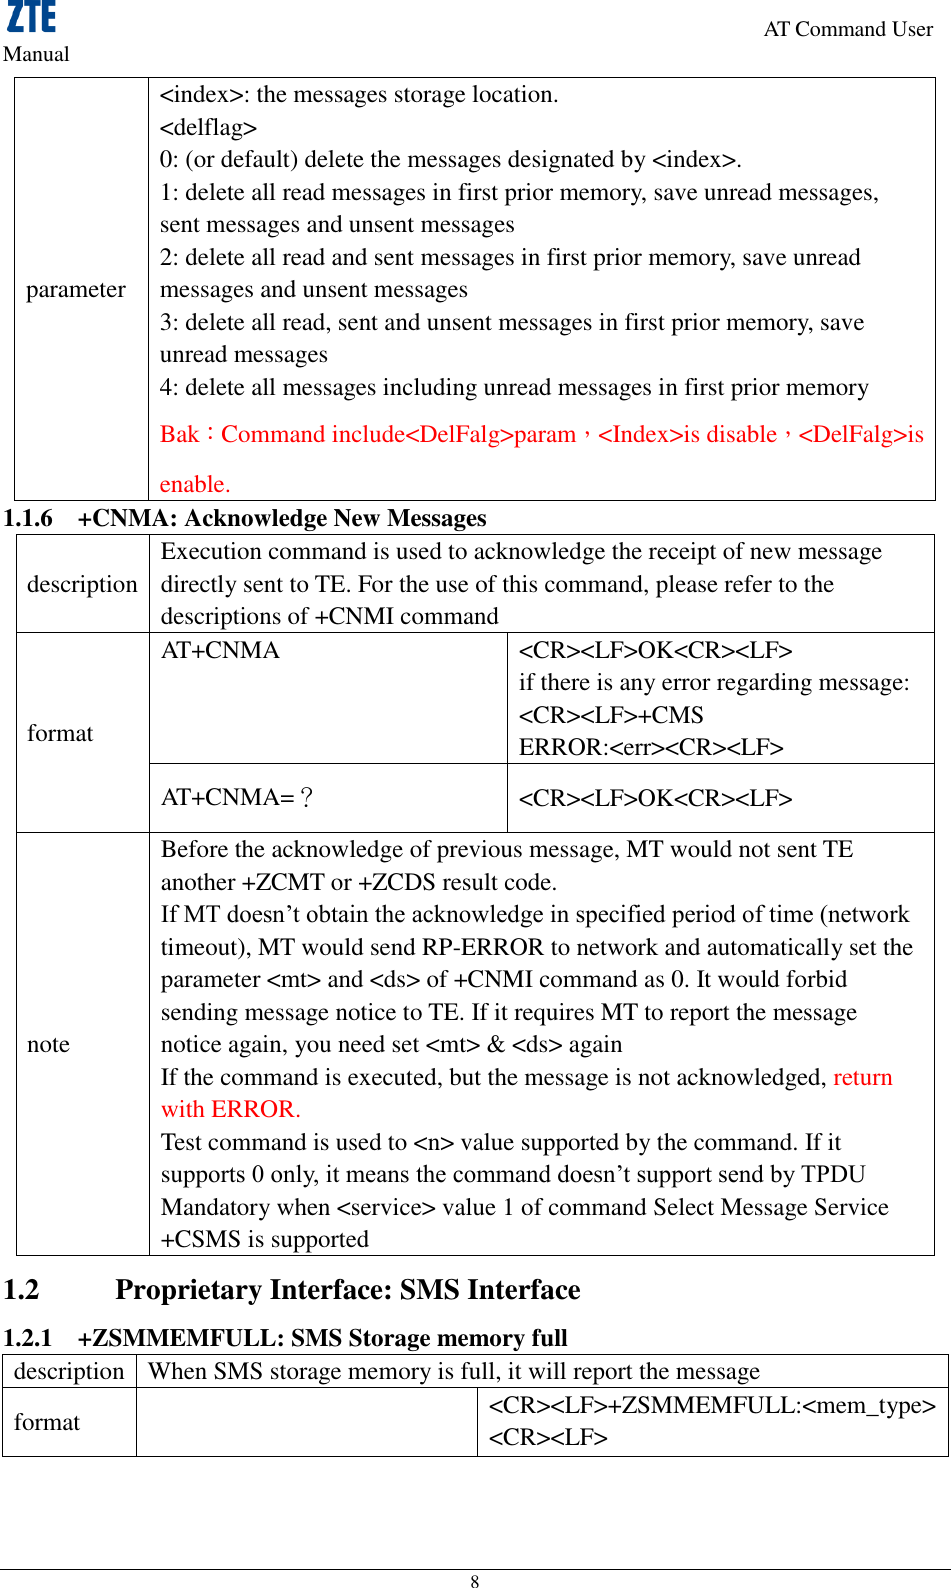                                                                     AT Command User Manual 8 parameter &lt;index&gt;: the messages storage location.     &lt;delflag&gt; 0: (or default) delete the messages designated by &lt;index&gt;. 1: delete all read messages in first prior memory, save unread messages, sent messages and unsent messages   2: delete all read and sent messages in first prior memory, save unread messages and unsent messages   3: delete all read, sent and unsent messages in first prior memory, save unread messages   4: delete all messages including unread messages in first prior memory Bak：Command include&lt;DelFalg&gt;param，&lt;Index&gt;is disable，&lt;DelFalg&gt;is enable. 1.1.6 +CNMA: Acknowledge New Messages description Execution command is used to acknowledge the receipt of new message directly sent to TE. For the use of this command, please refer to the descriptions of +CNMI command format AT+CNMA &lt;CR&gt;&lt;LF&gt;OK&lt;CR&gt;&lt;LF&gt;   if there is any error regarding message:   &lt;CR&gt;&lt;LF&gt;+CMS ERROR:&lt;err&gt;&lt;CR&gt;&lt;LF&gt; AT+CNMA=？ &lt;CR&gt;&lt;LF&gt;OK&lt;CR&gt;&lt;LF&gt; note Before the acknowledge of previous message, MT would not sent TE another +ZCMT or +ZCDS result code.   If MT doesn‟t obtain the acknowledge in specified period of time (network timeout), MT would send RP-ERROR to network and automatically set the parameter &lt;mt&gt; and &lt;ds&gt; of +CNMI command as 0. It would forbid sending message notice to TE. If it requires MT to report the message notice again, you need set &lt;mt&gt; &amp; &lt;ds&gt; again   If the command is executed, but the message is not acknowledged, return with ERROR.   Test command is used to &lt;n&gt; value supported by the command. If it supports 0 only, it means the command doesn‟t support send by TPDU Mandatory when &lt;service&gt; value 1 of command Select Message Service +CSMS is supported 1.2 Proprietary Interface: SMS Interface 1.2.1 +ZSMMEMFULL: SMS Storage memory full description When SMS storage memory is full, it will report the message format  &lt;CR&gt;&lt;LF&gt;+ZSMMEMFULL:&lt;mem_type&gt; &lt;CR&gt;&lt;LF&gt; 